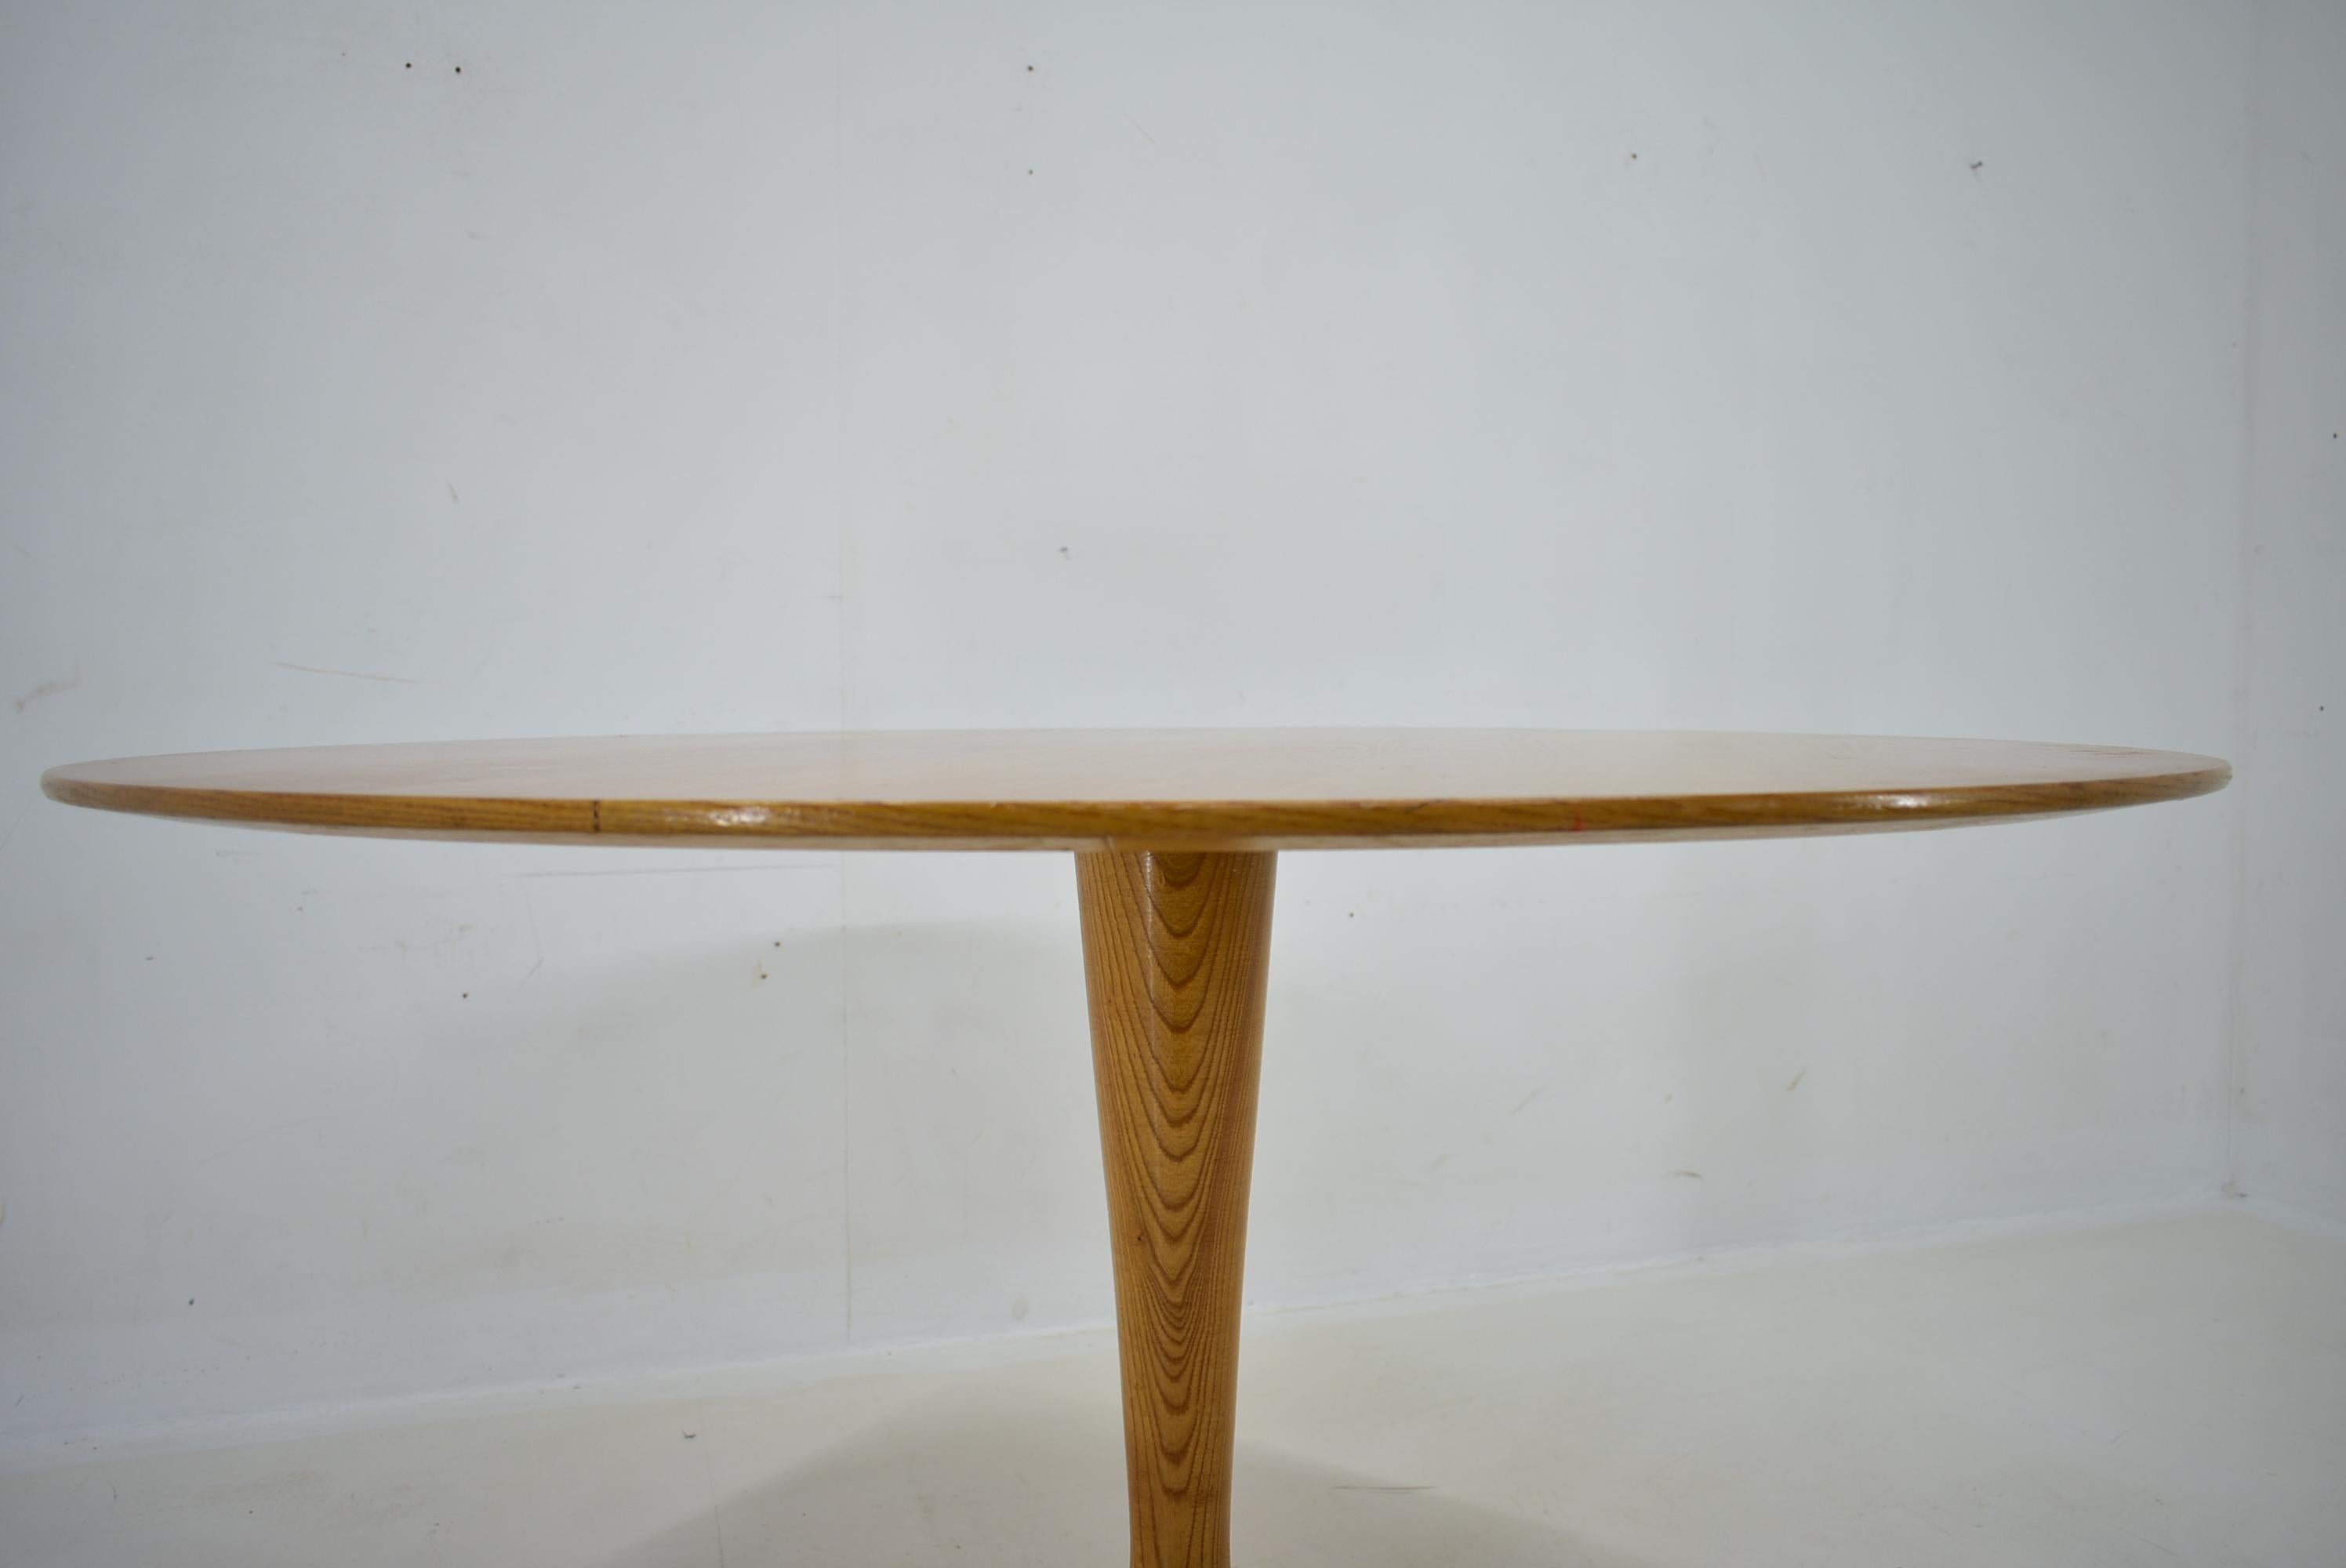 1960s Beech Round Dining Table, Czechoslovakia For Sale 4